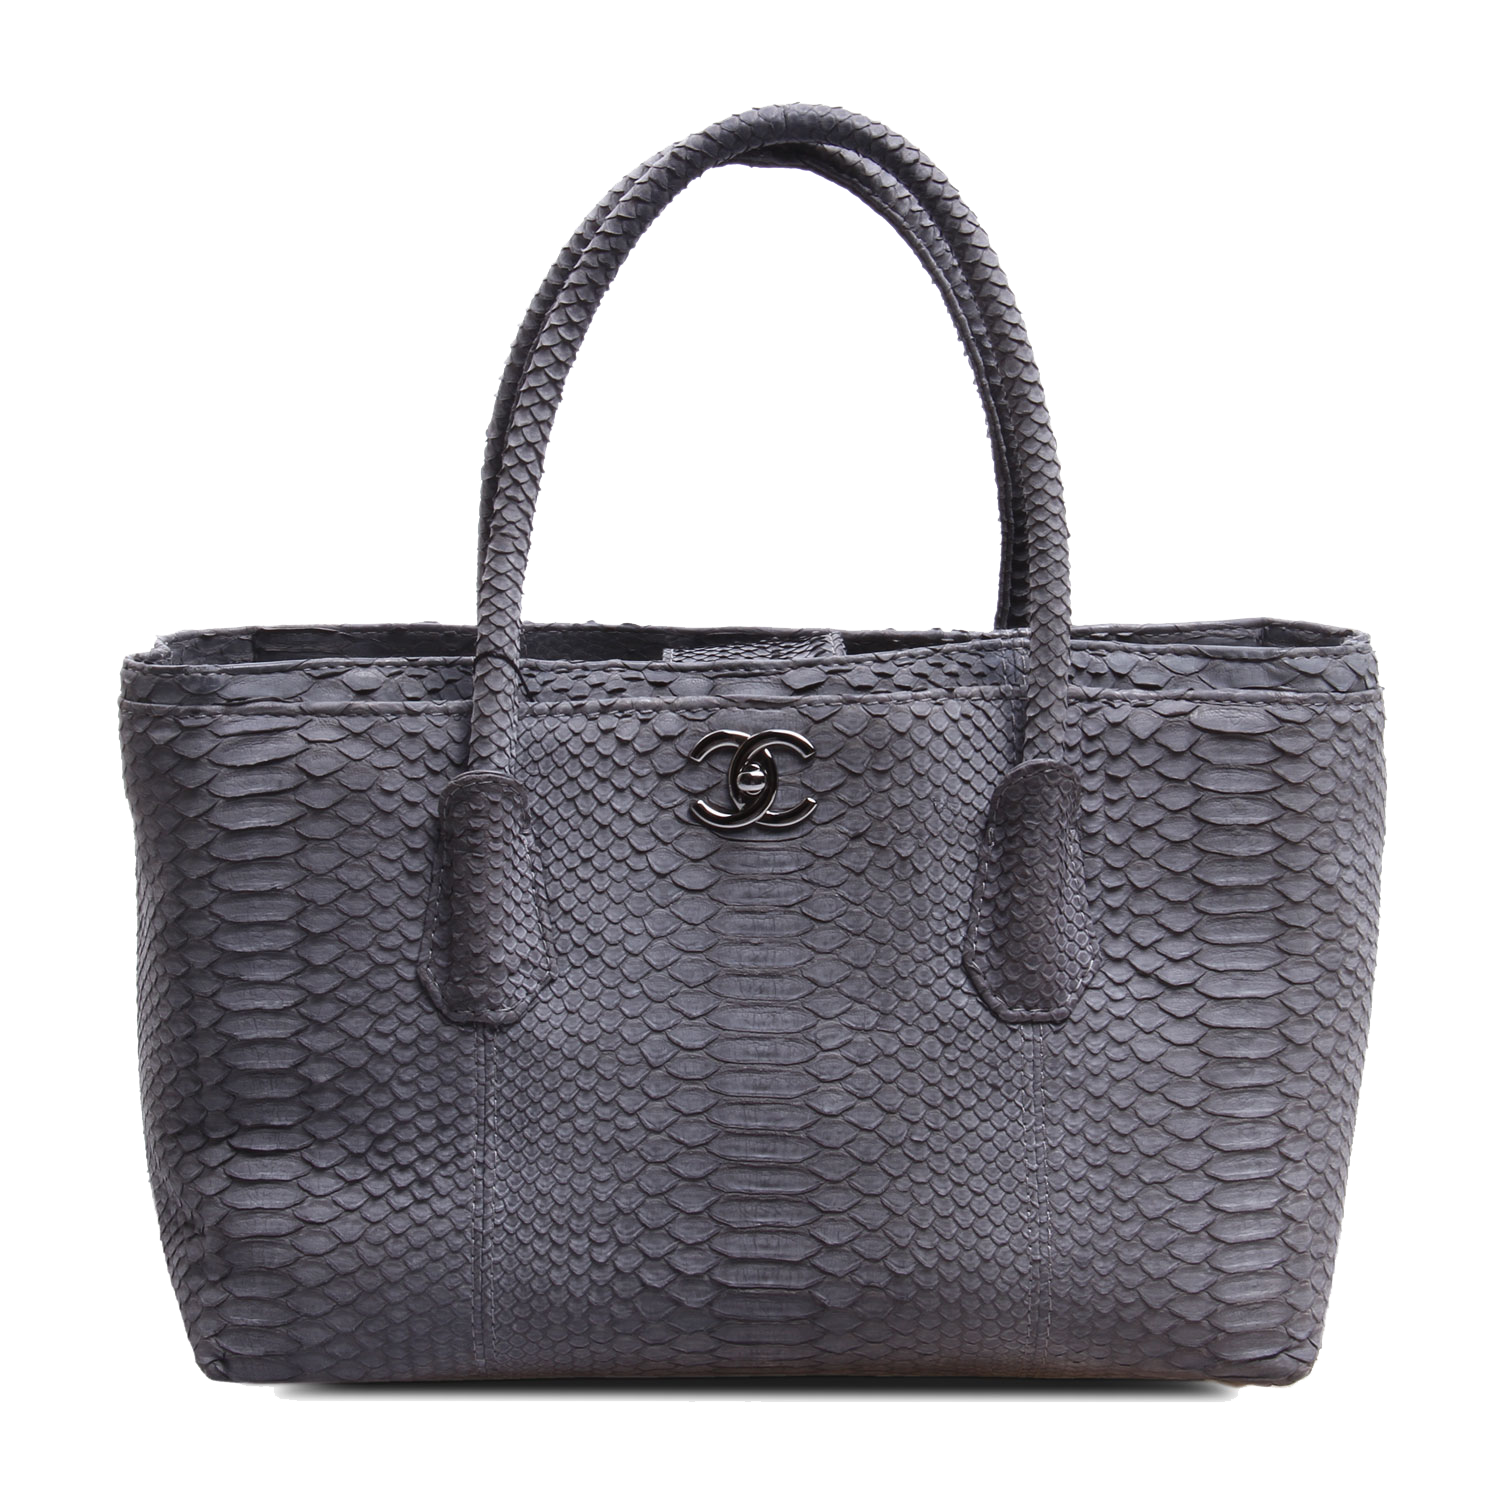 Vuitton Tote Leather Louis Snakeskin Bag Pattern PNG Image